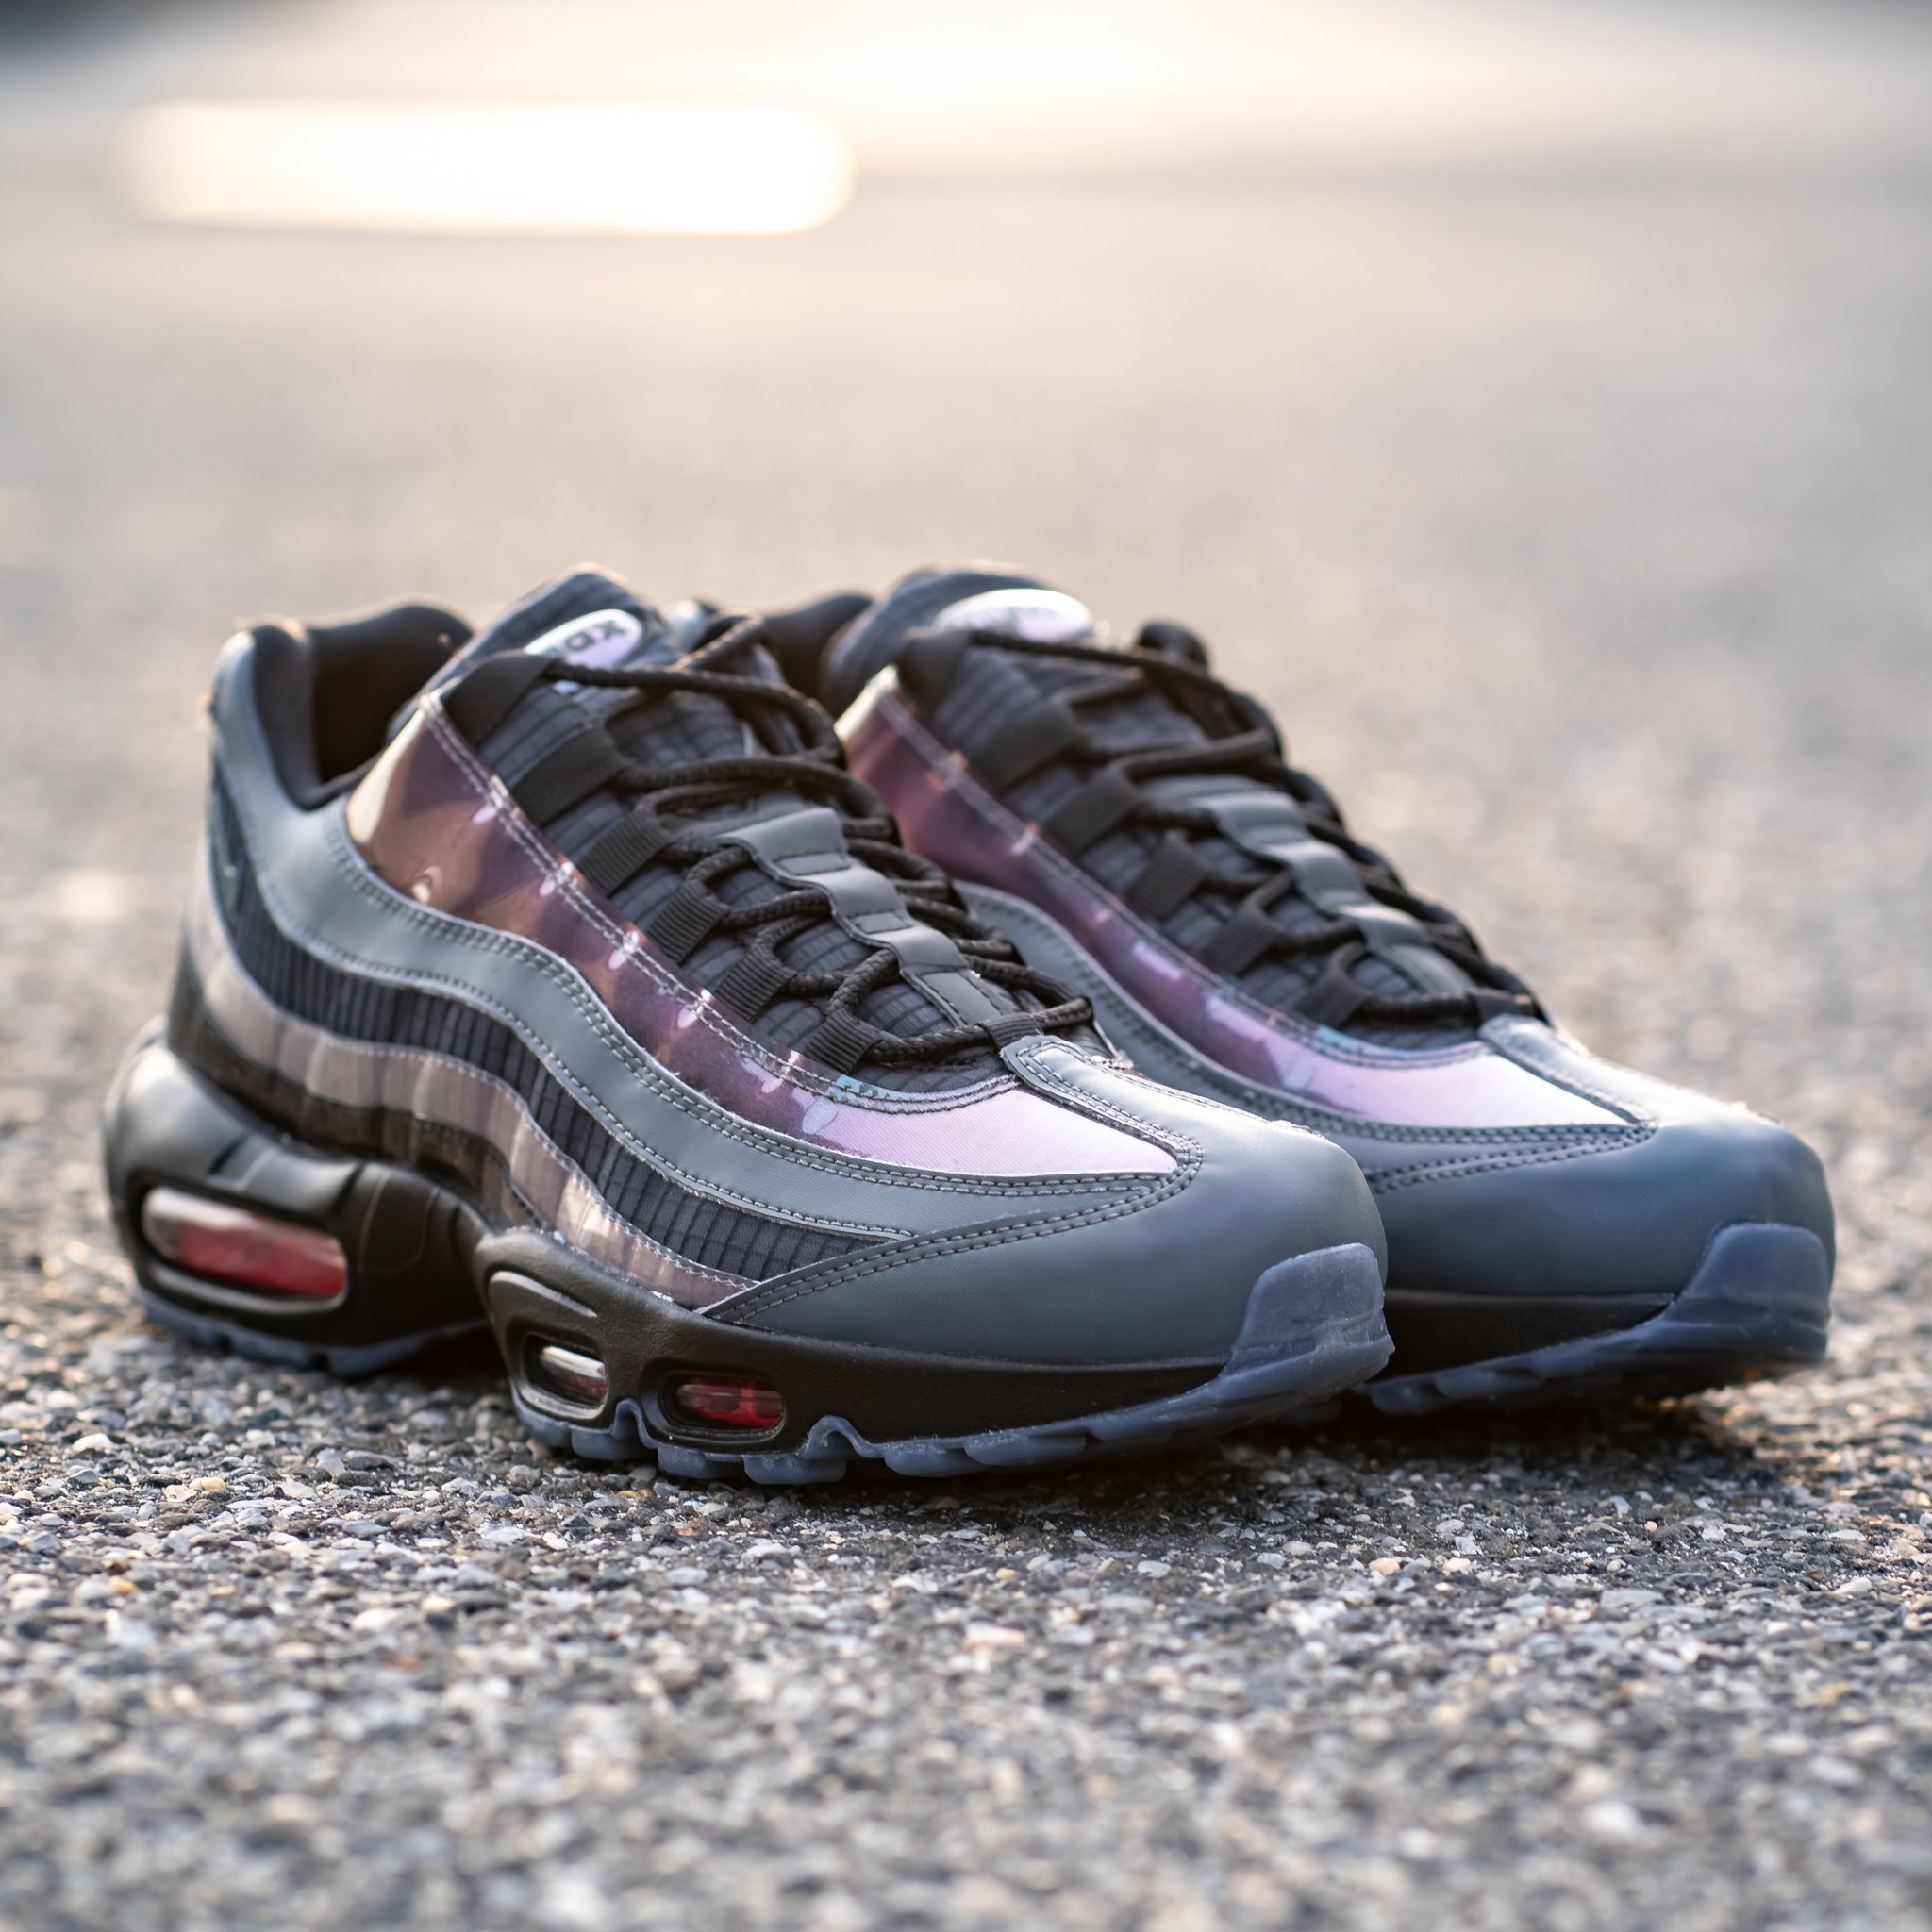 GB'S Sneaker Shop on Twitter: Air Max 95 "Ember Glow" Releasing 12/26/2018 Men's (7.5-13) $170 AO2450-001 #nike #airmax #airmax95lv8 #gbny #emberglow —————————————— 24/7 Customer Service 📞 Call/Text to Order: